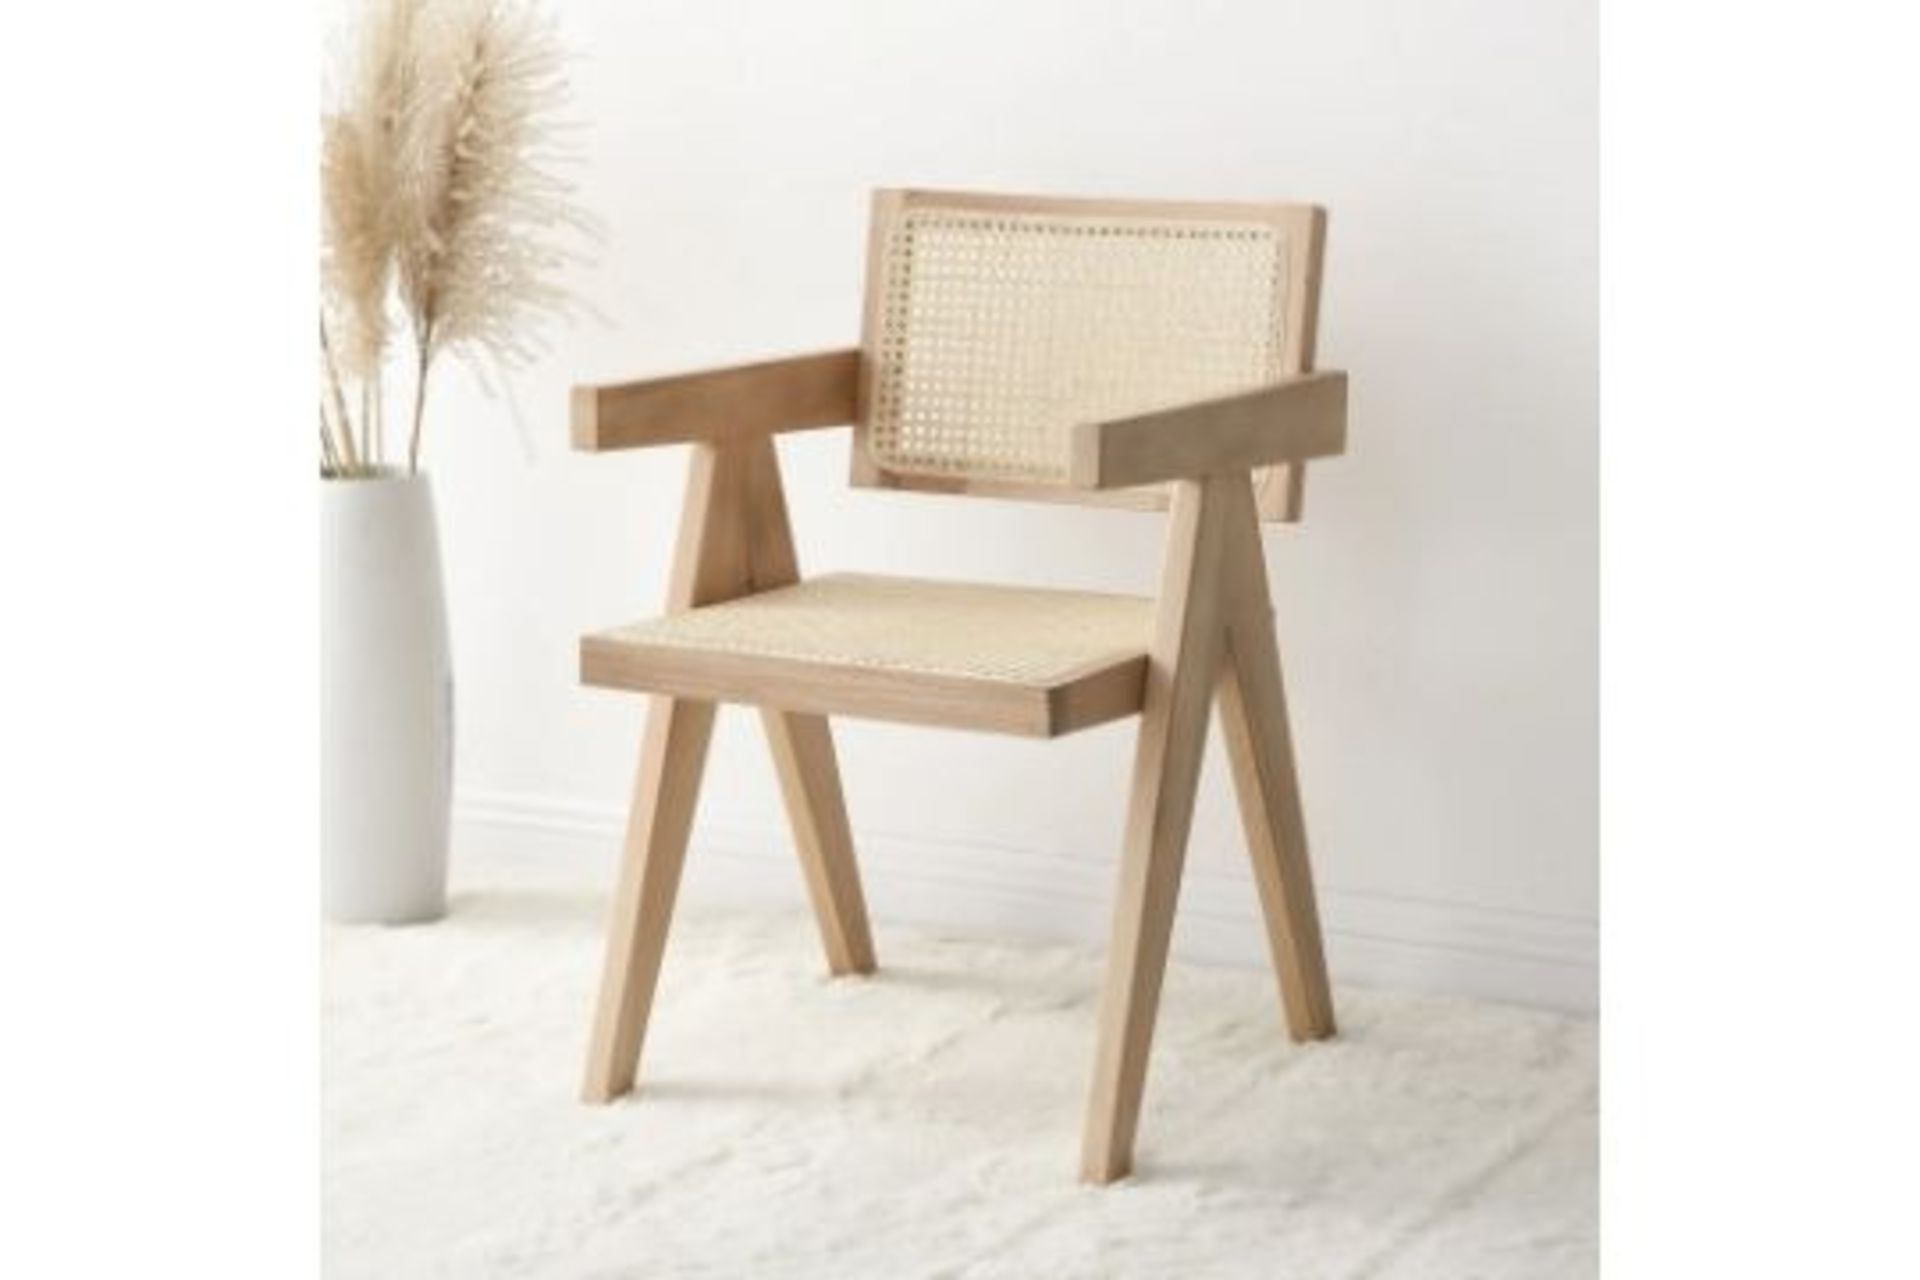 Jeanne Natural Colour Cane Rattan Solid Beech Wood Dining Chair. - ER24. RRP £219.99. The cane